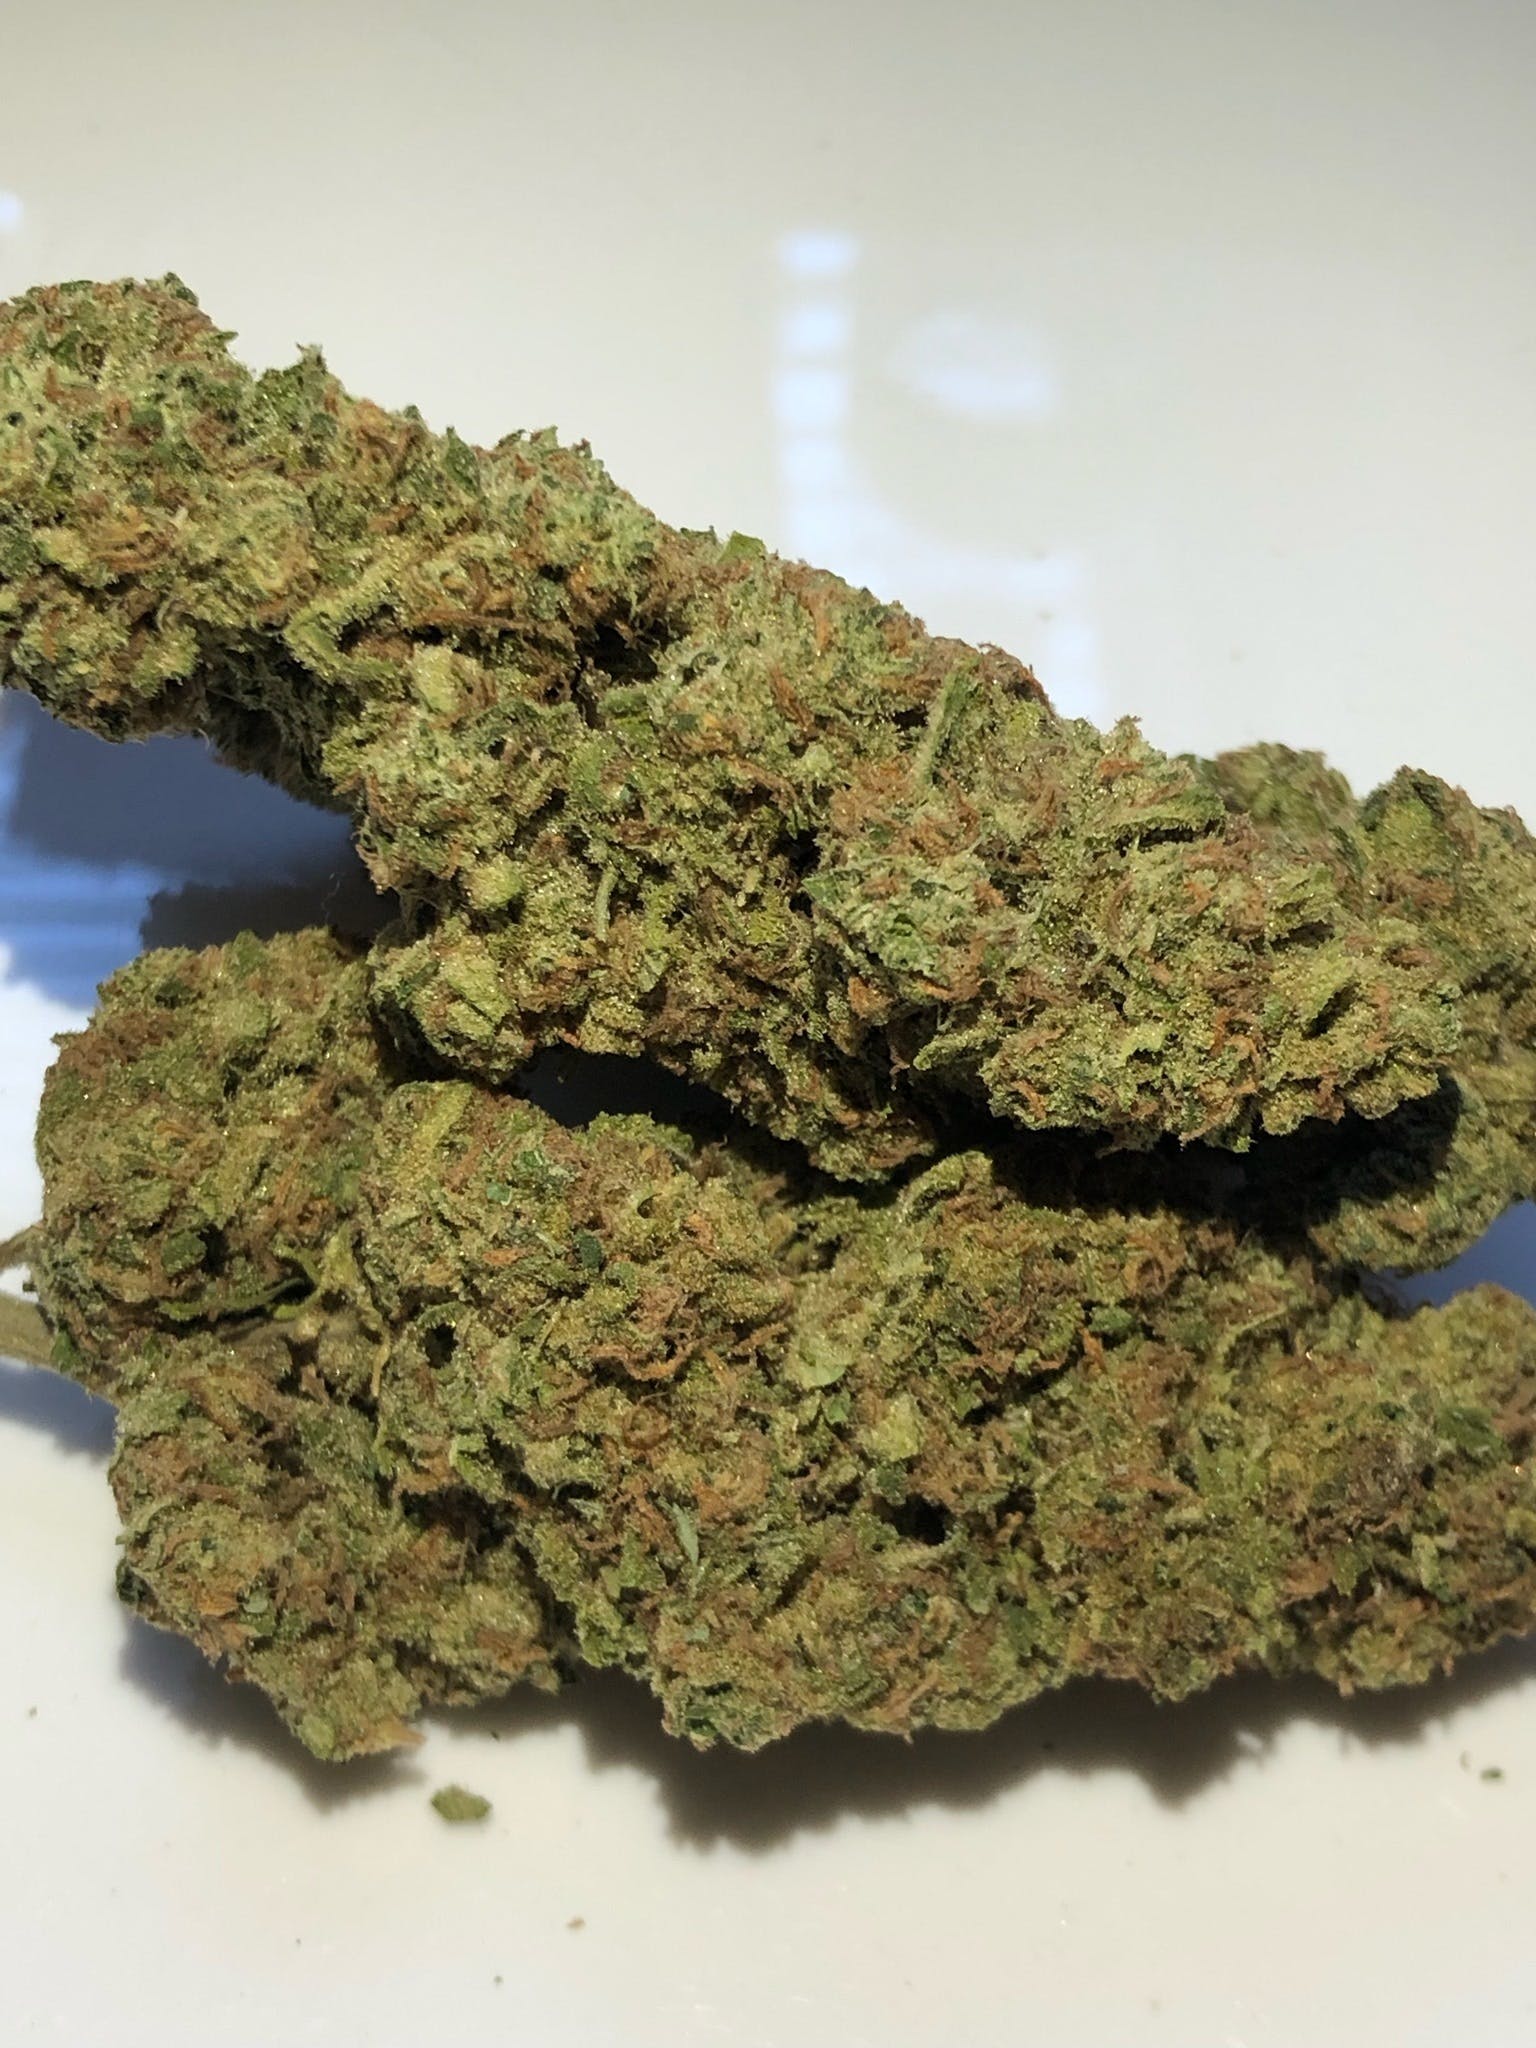 marijuana-dispensaries-by-appointment-only-2c-call-to-verify-fresno-strawberry-cough-24130-ounce-special